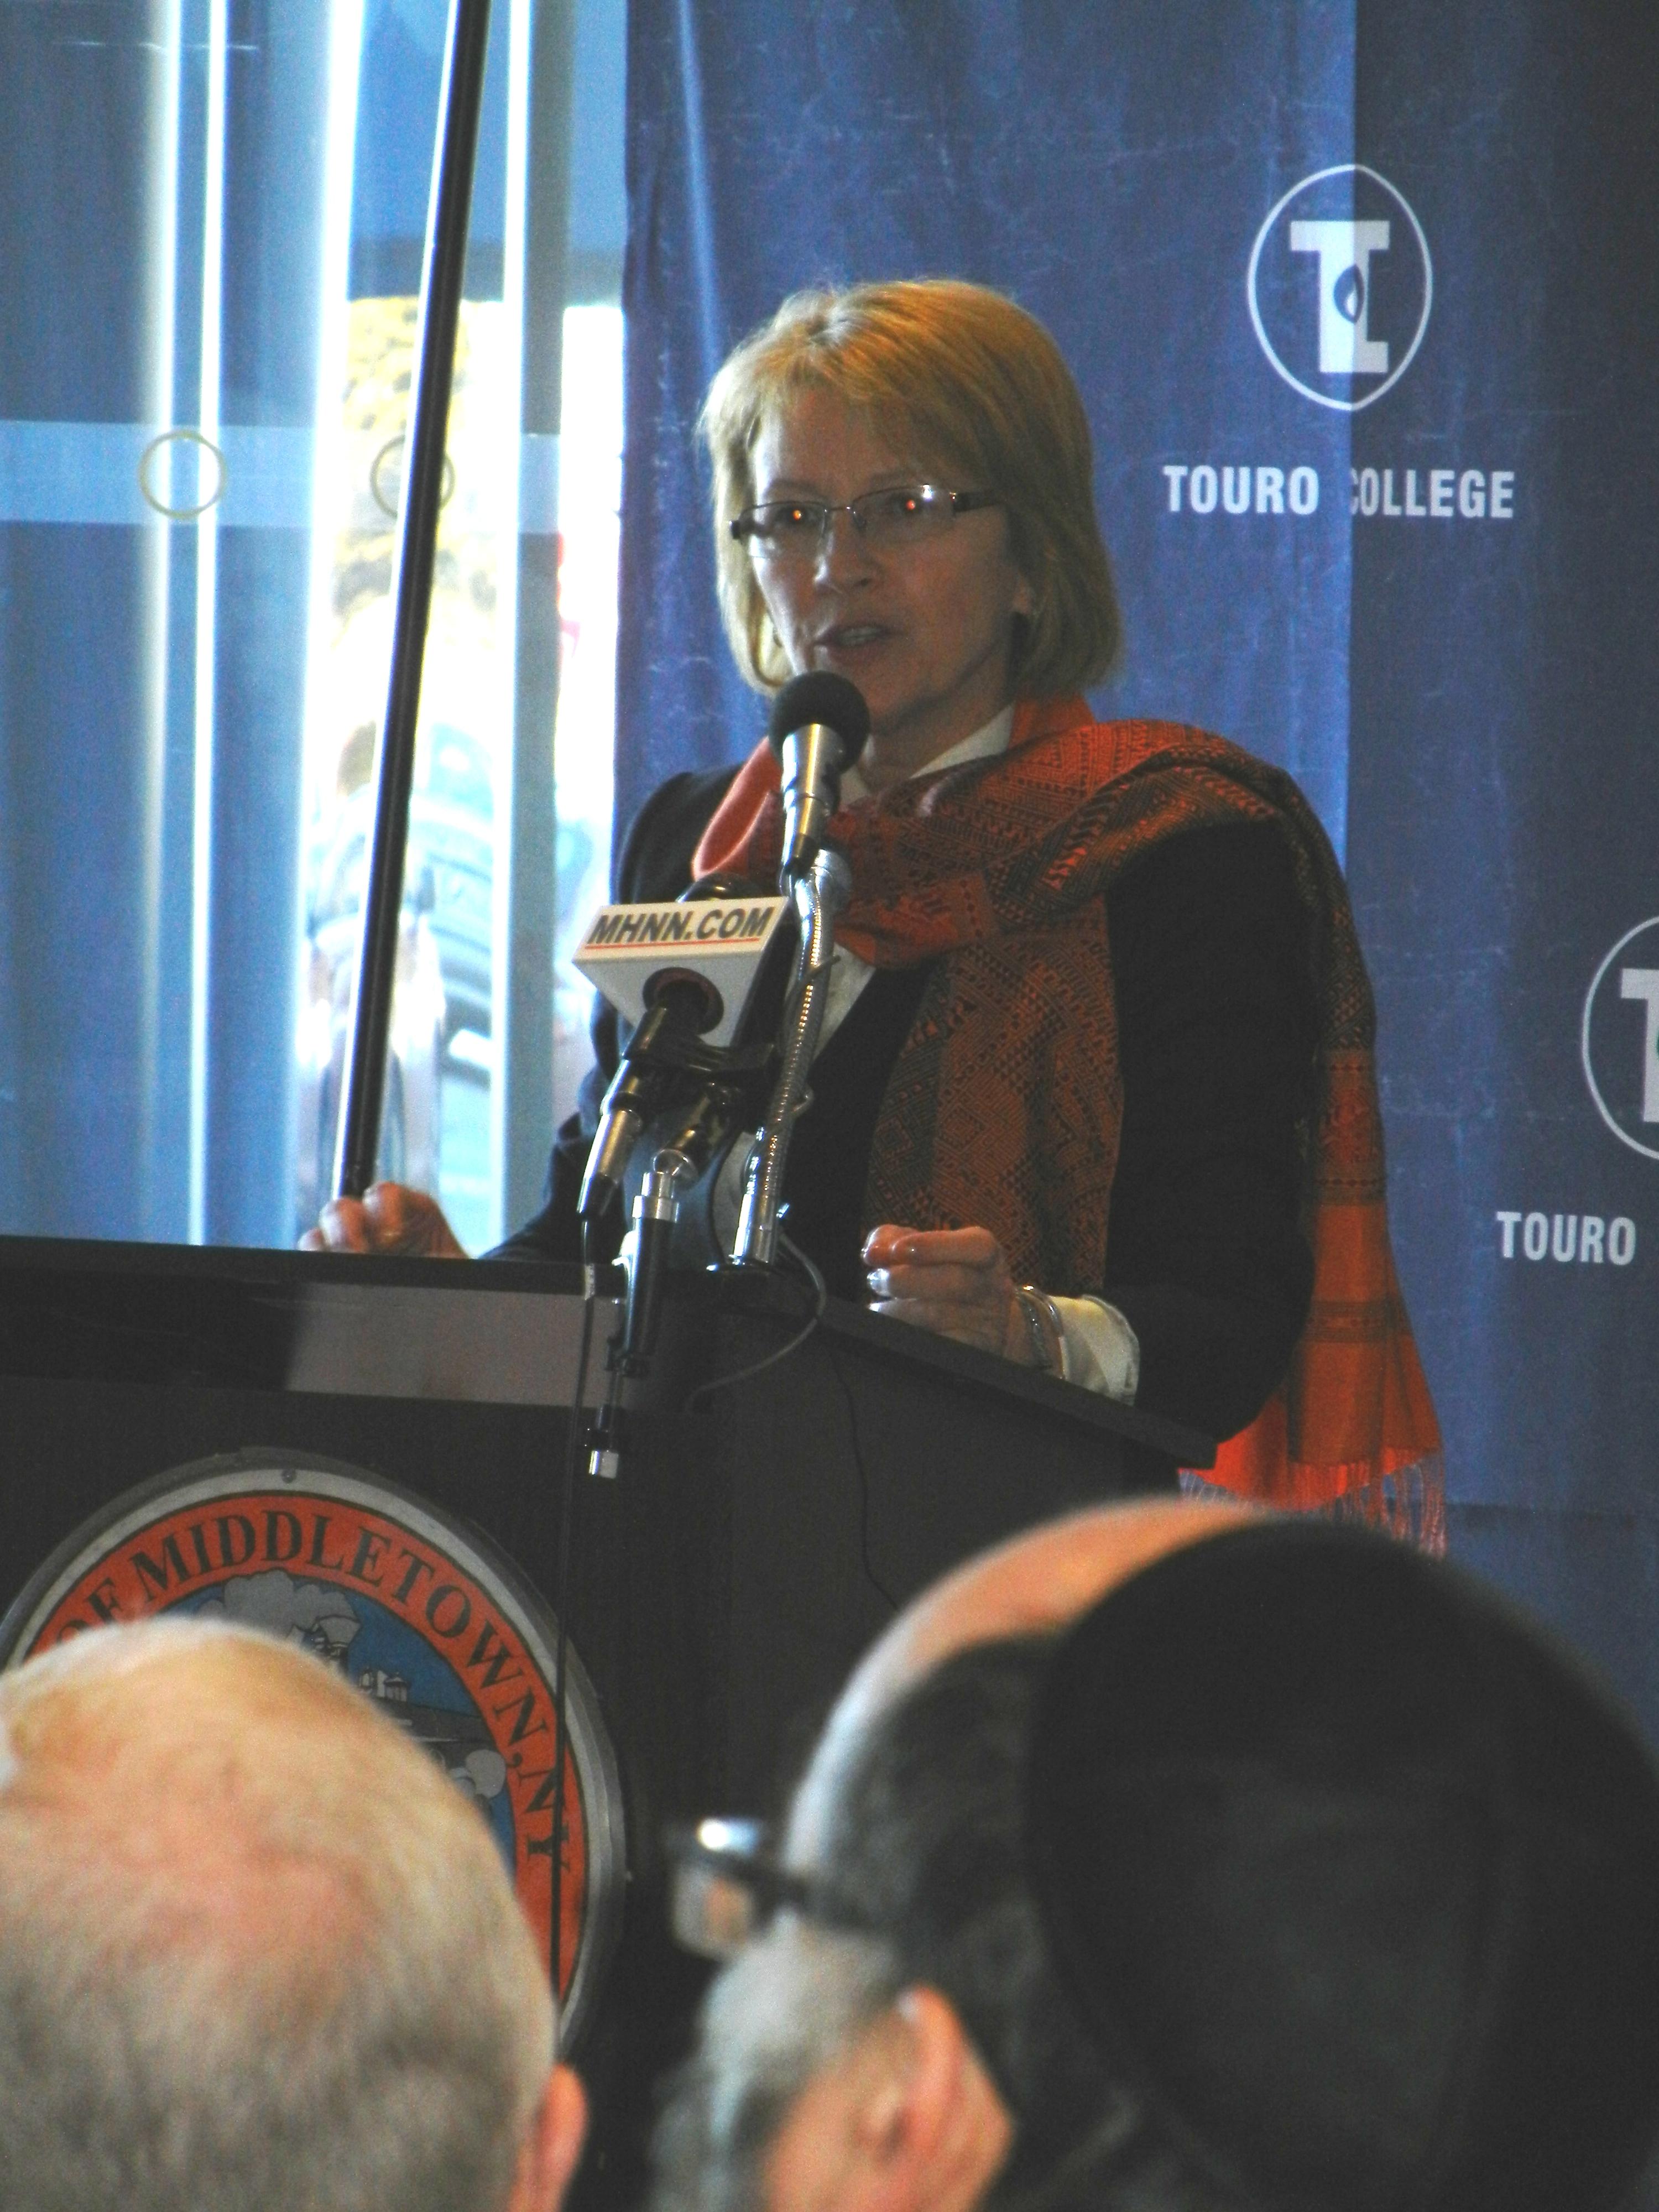 Assemblywoman Gunther spoke at the announcement of Touro Medical College of Osteopathic Medicine.  The College is slated to open at the campus of the former Horton Hospital in Middletown.